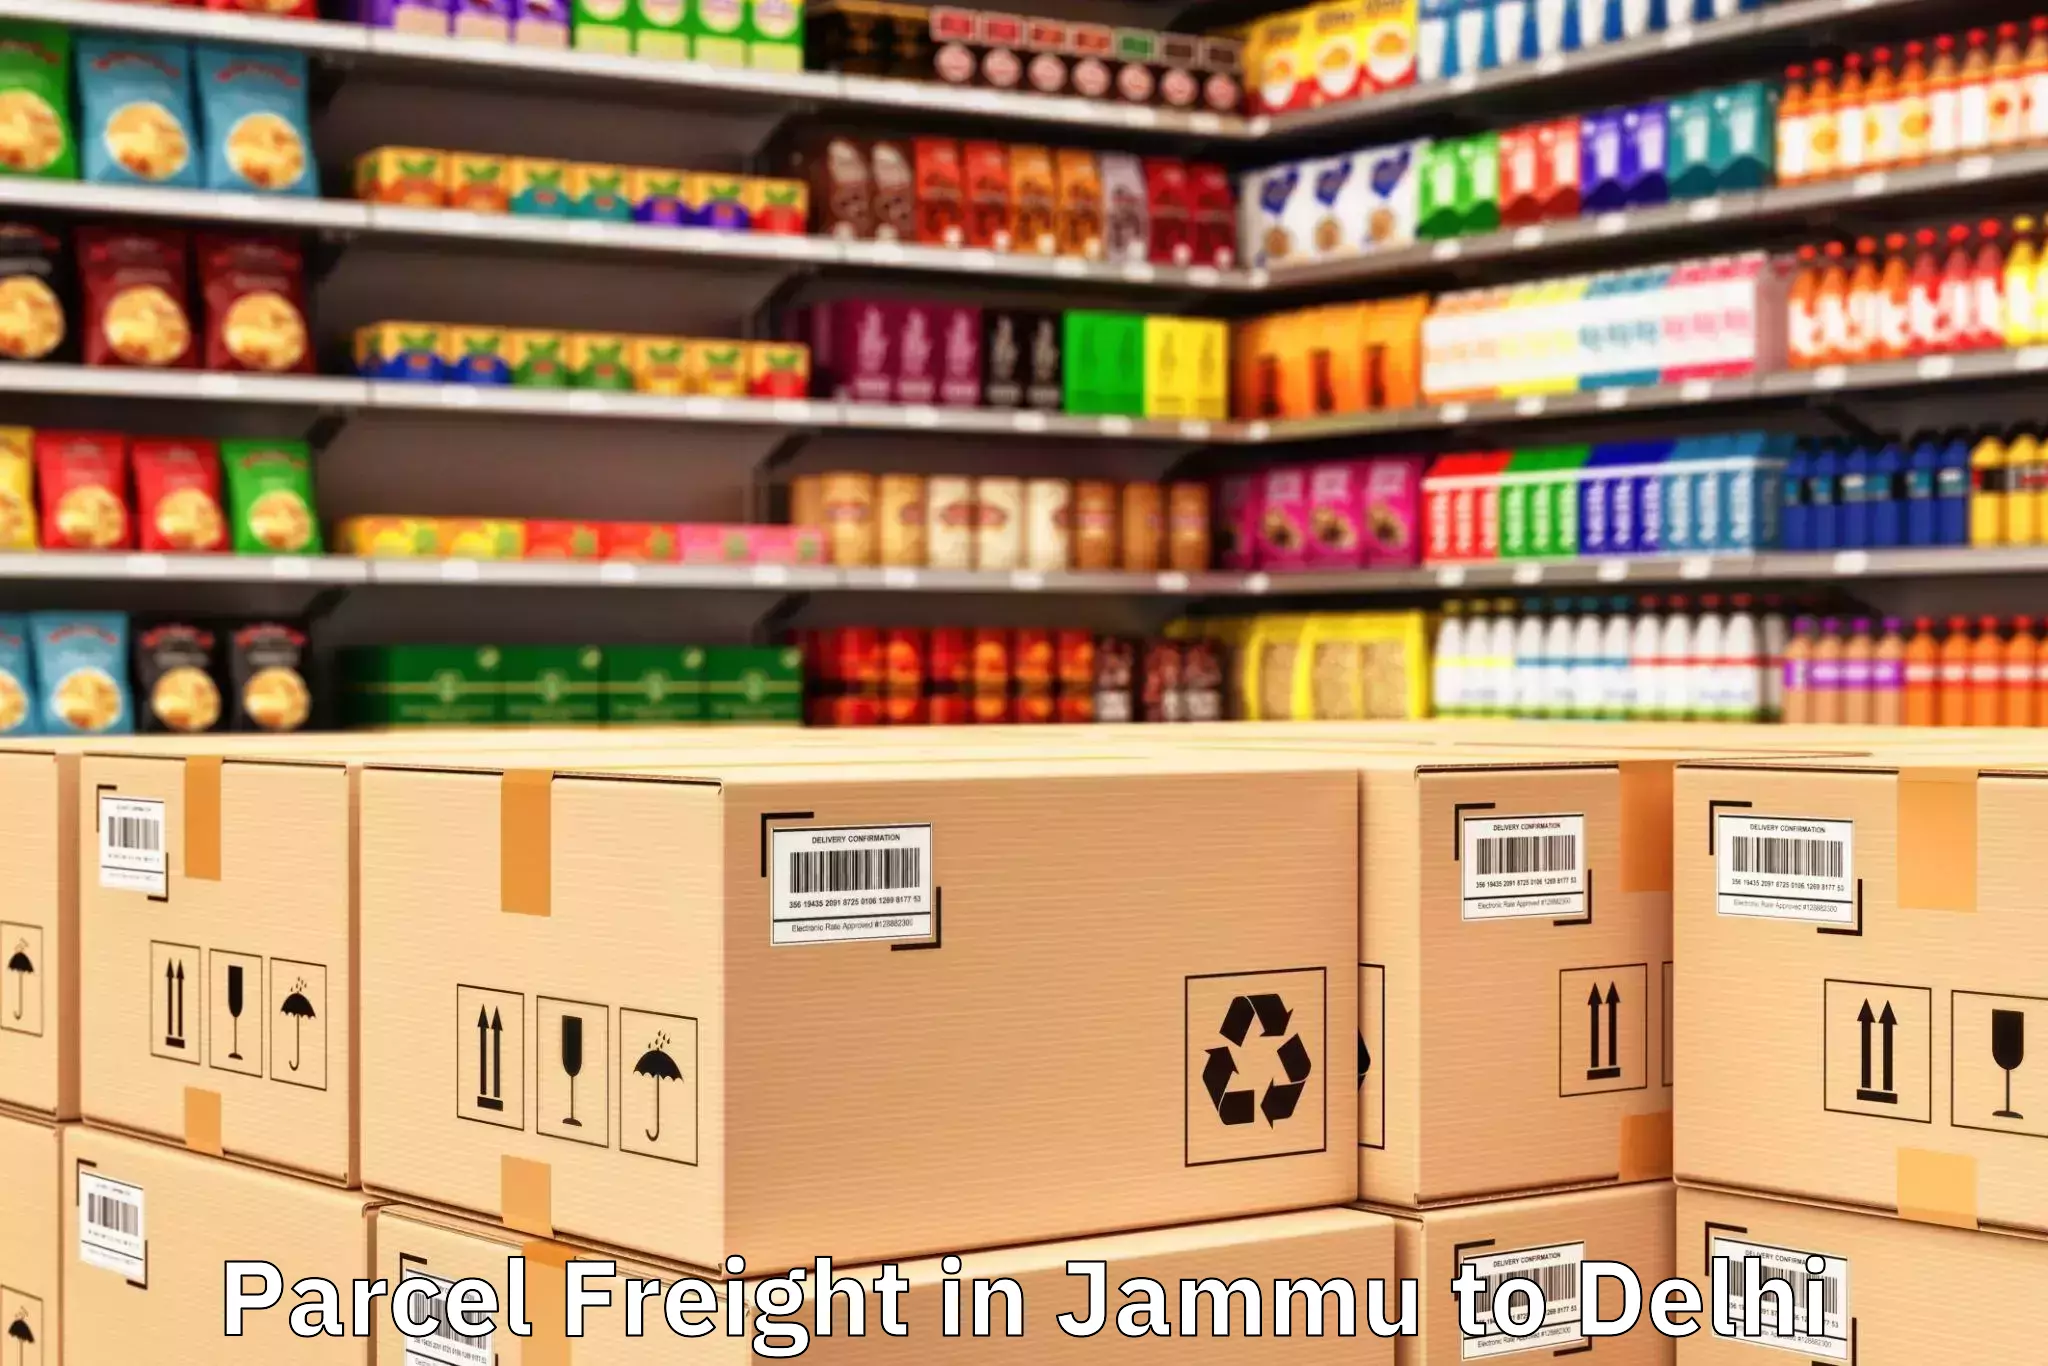 Professional Jammu to Ansal Crown Plaza Mall Parcel Freight